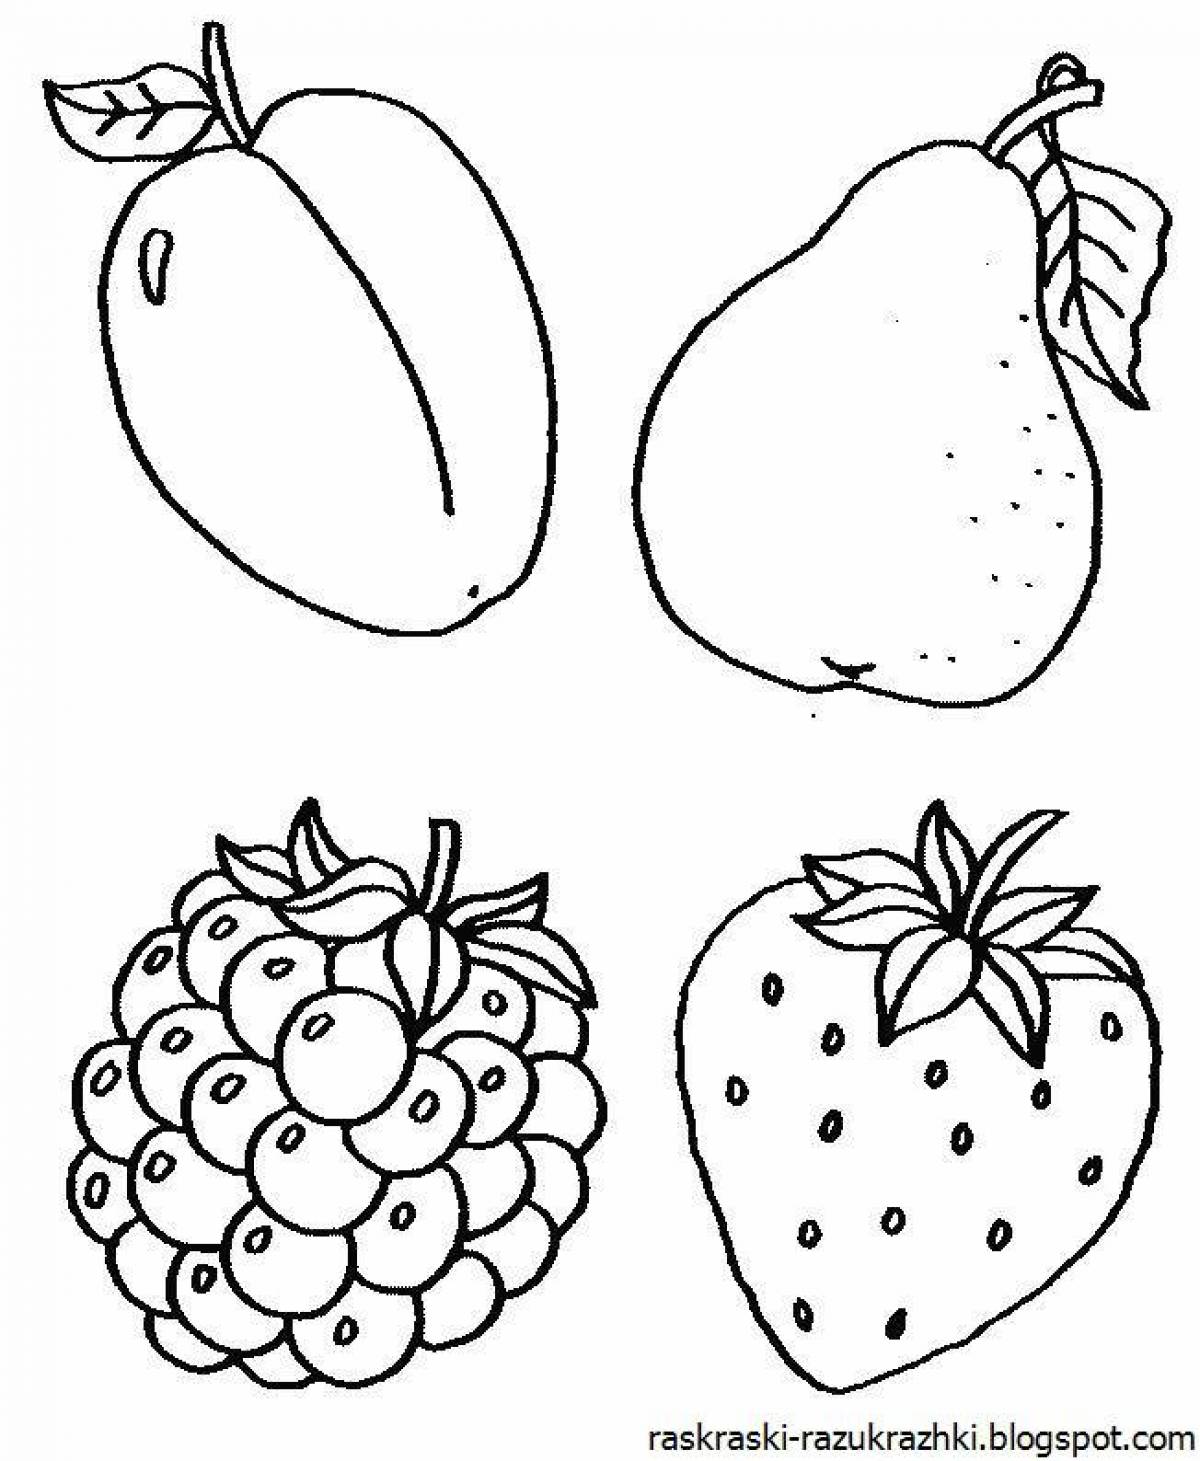 Coloring pages with fruits for children 3-4 years old